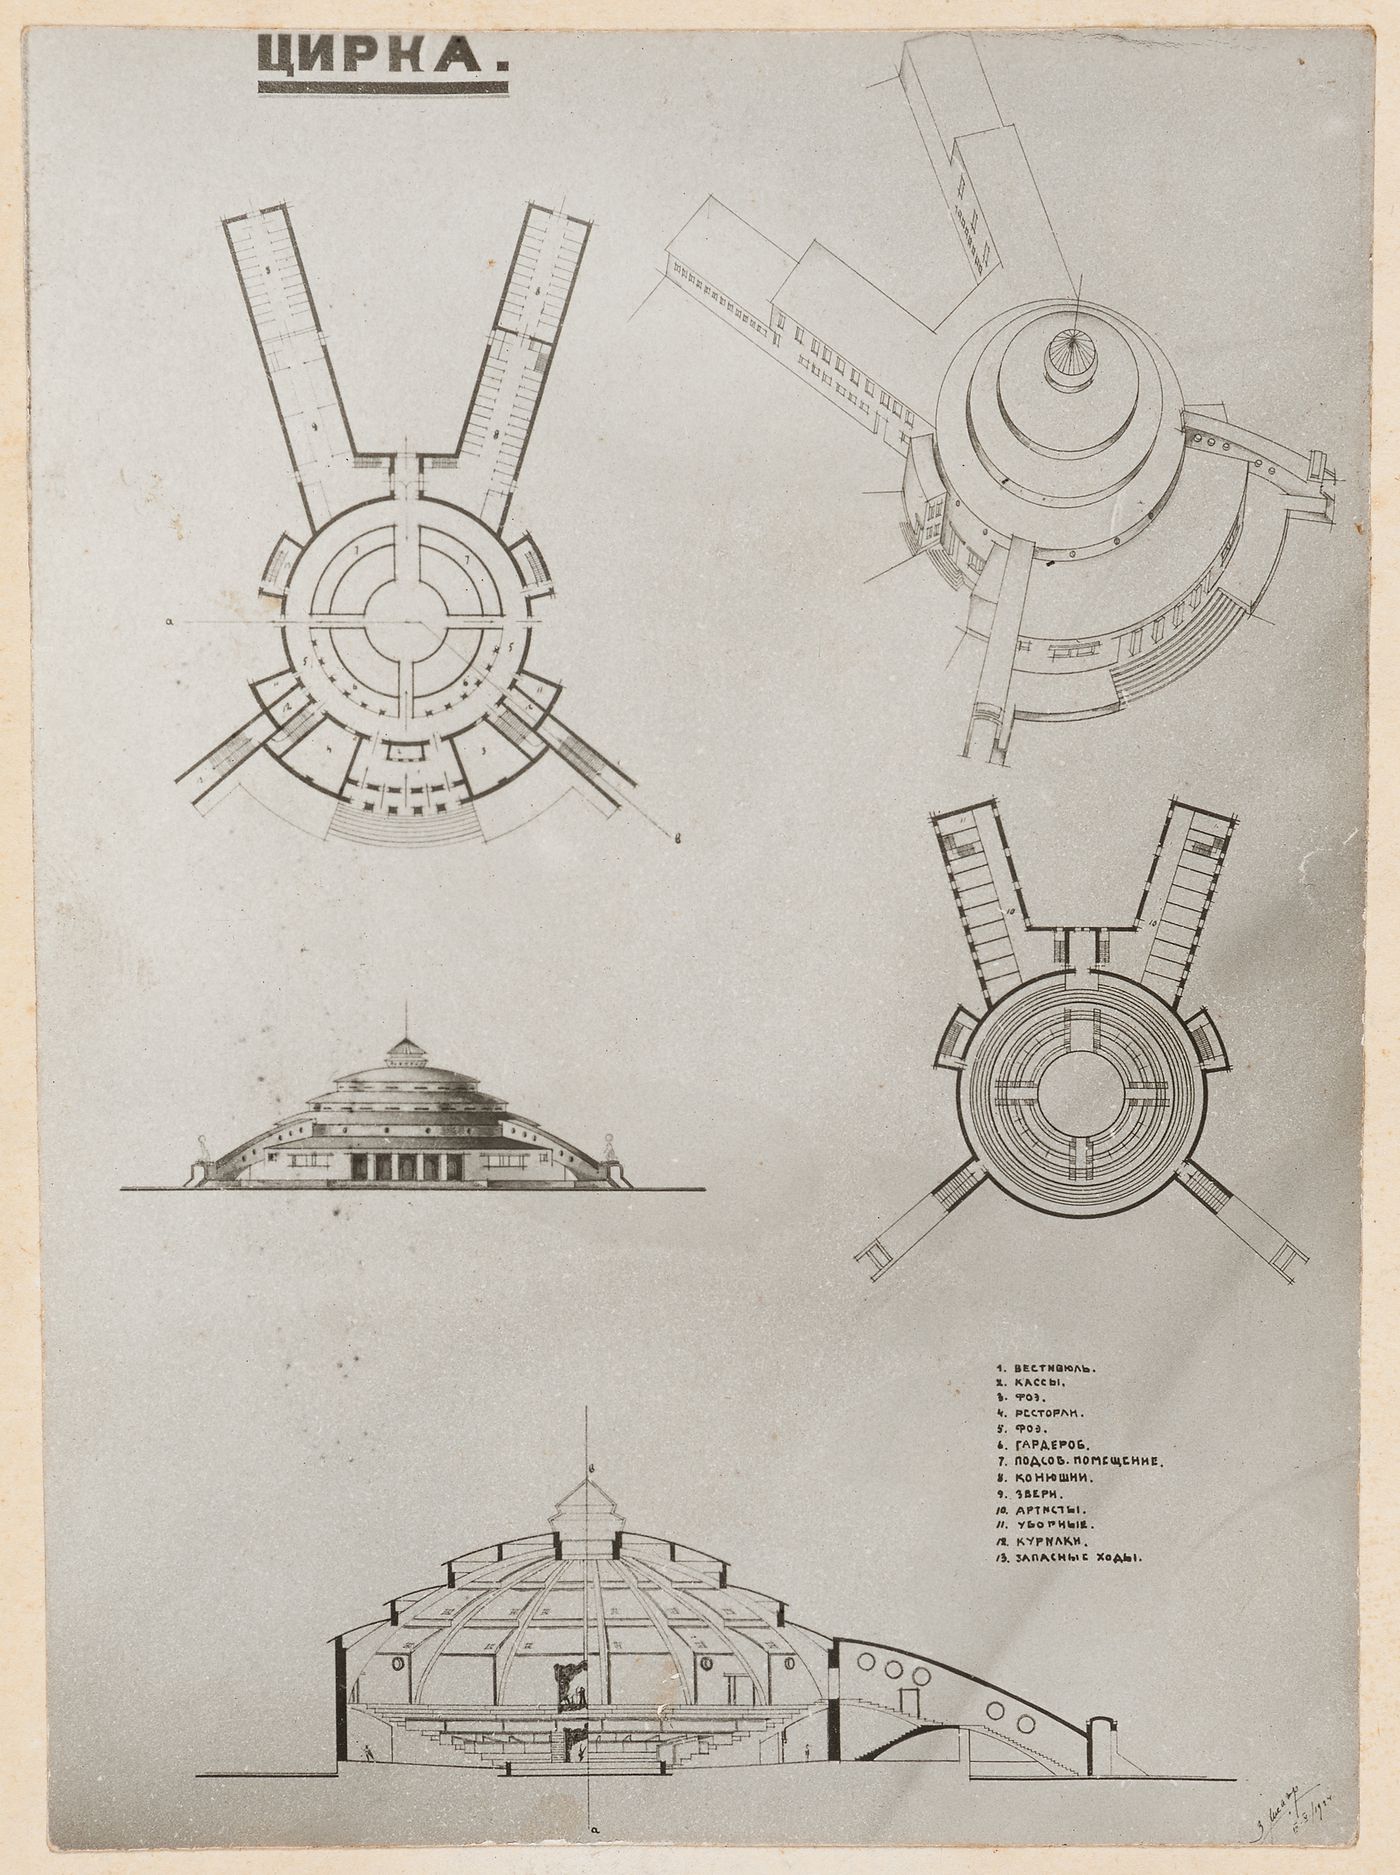 Photograph of plans, elevation, section and axonometric drawing for a circus